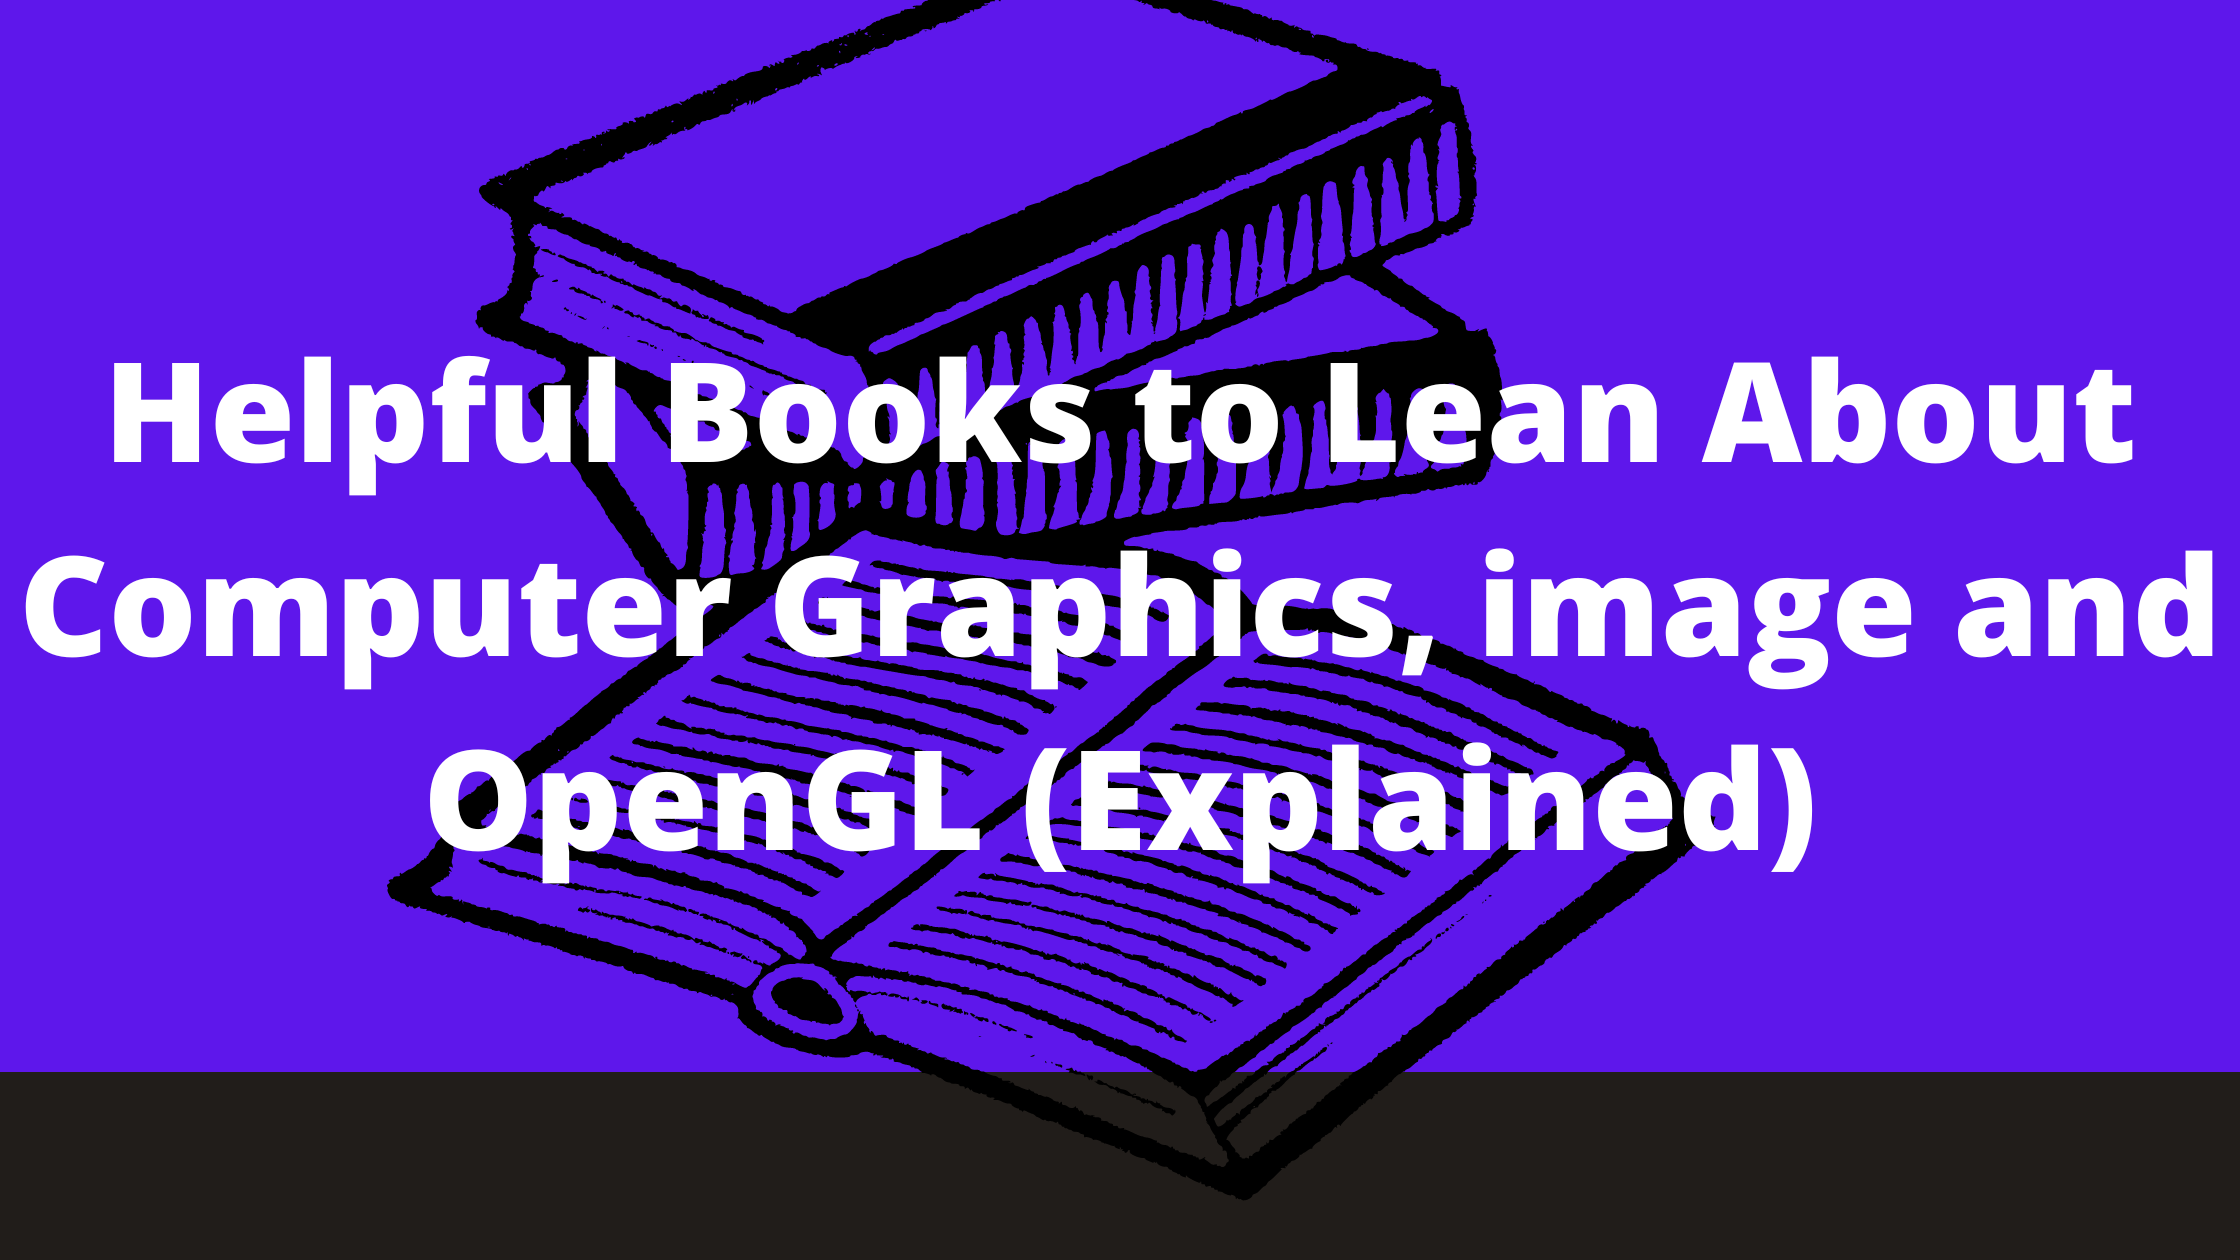 Helpful Books to Lean About Computer Graphics, image and OpenGL (Explained)